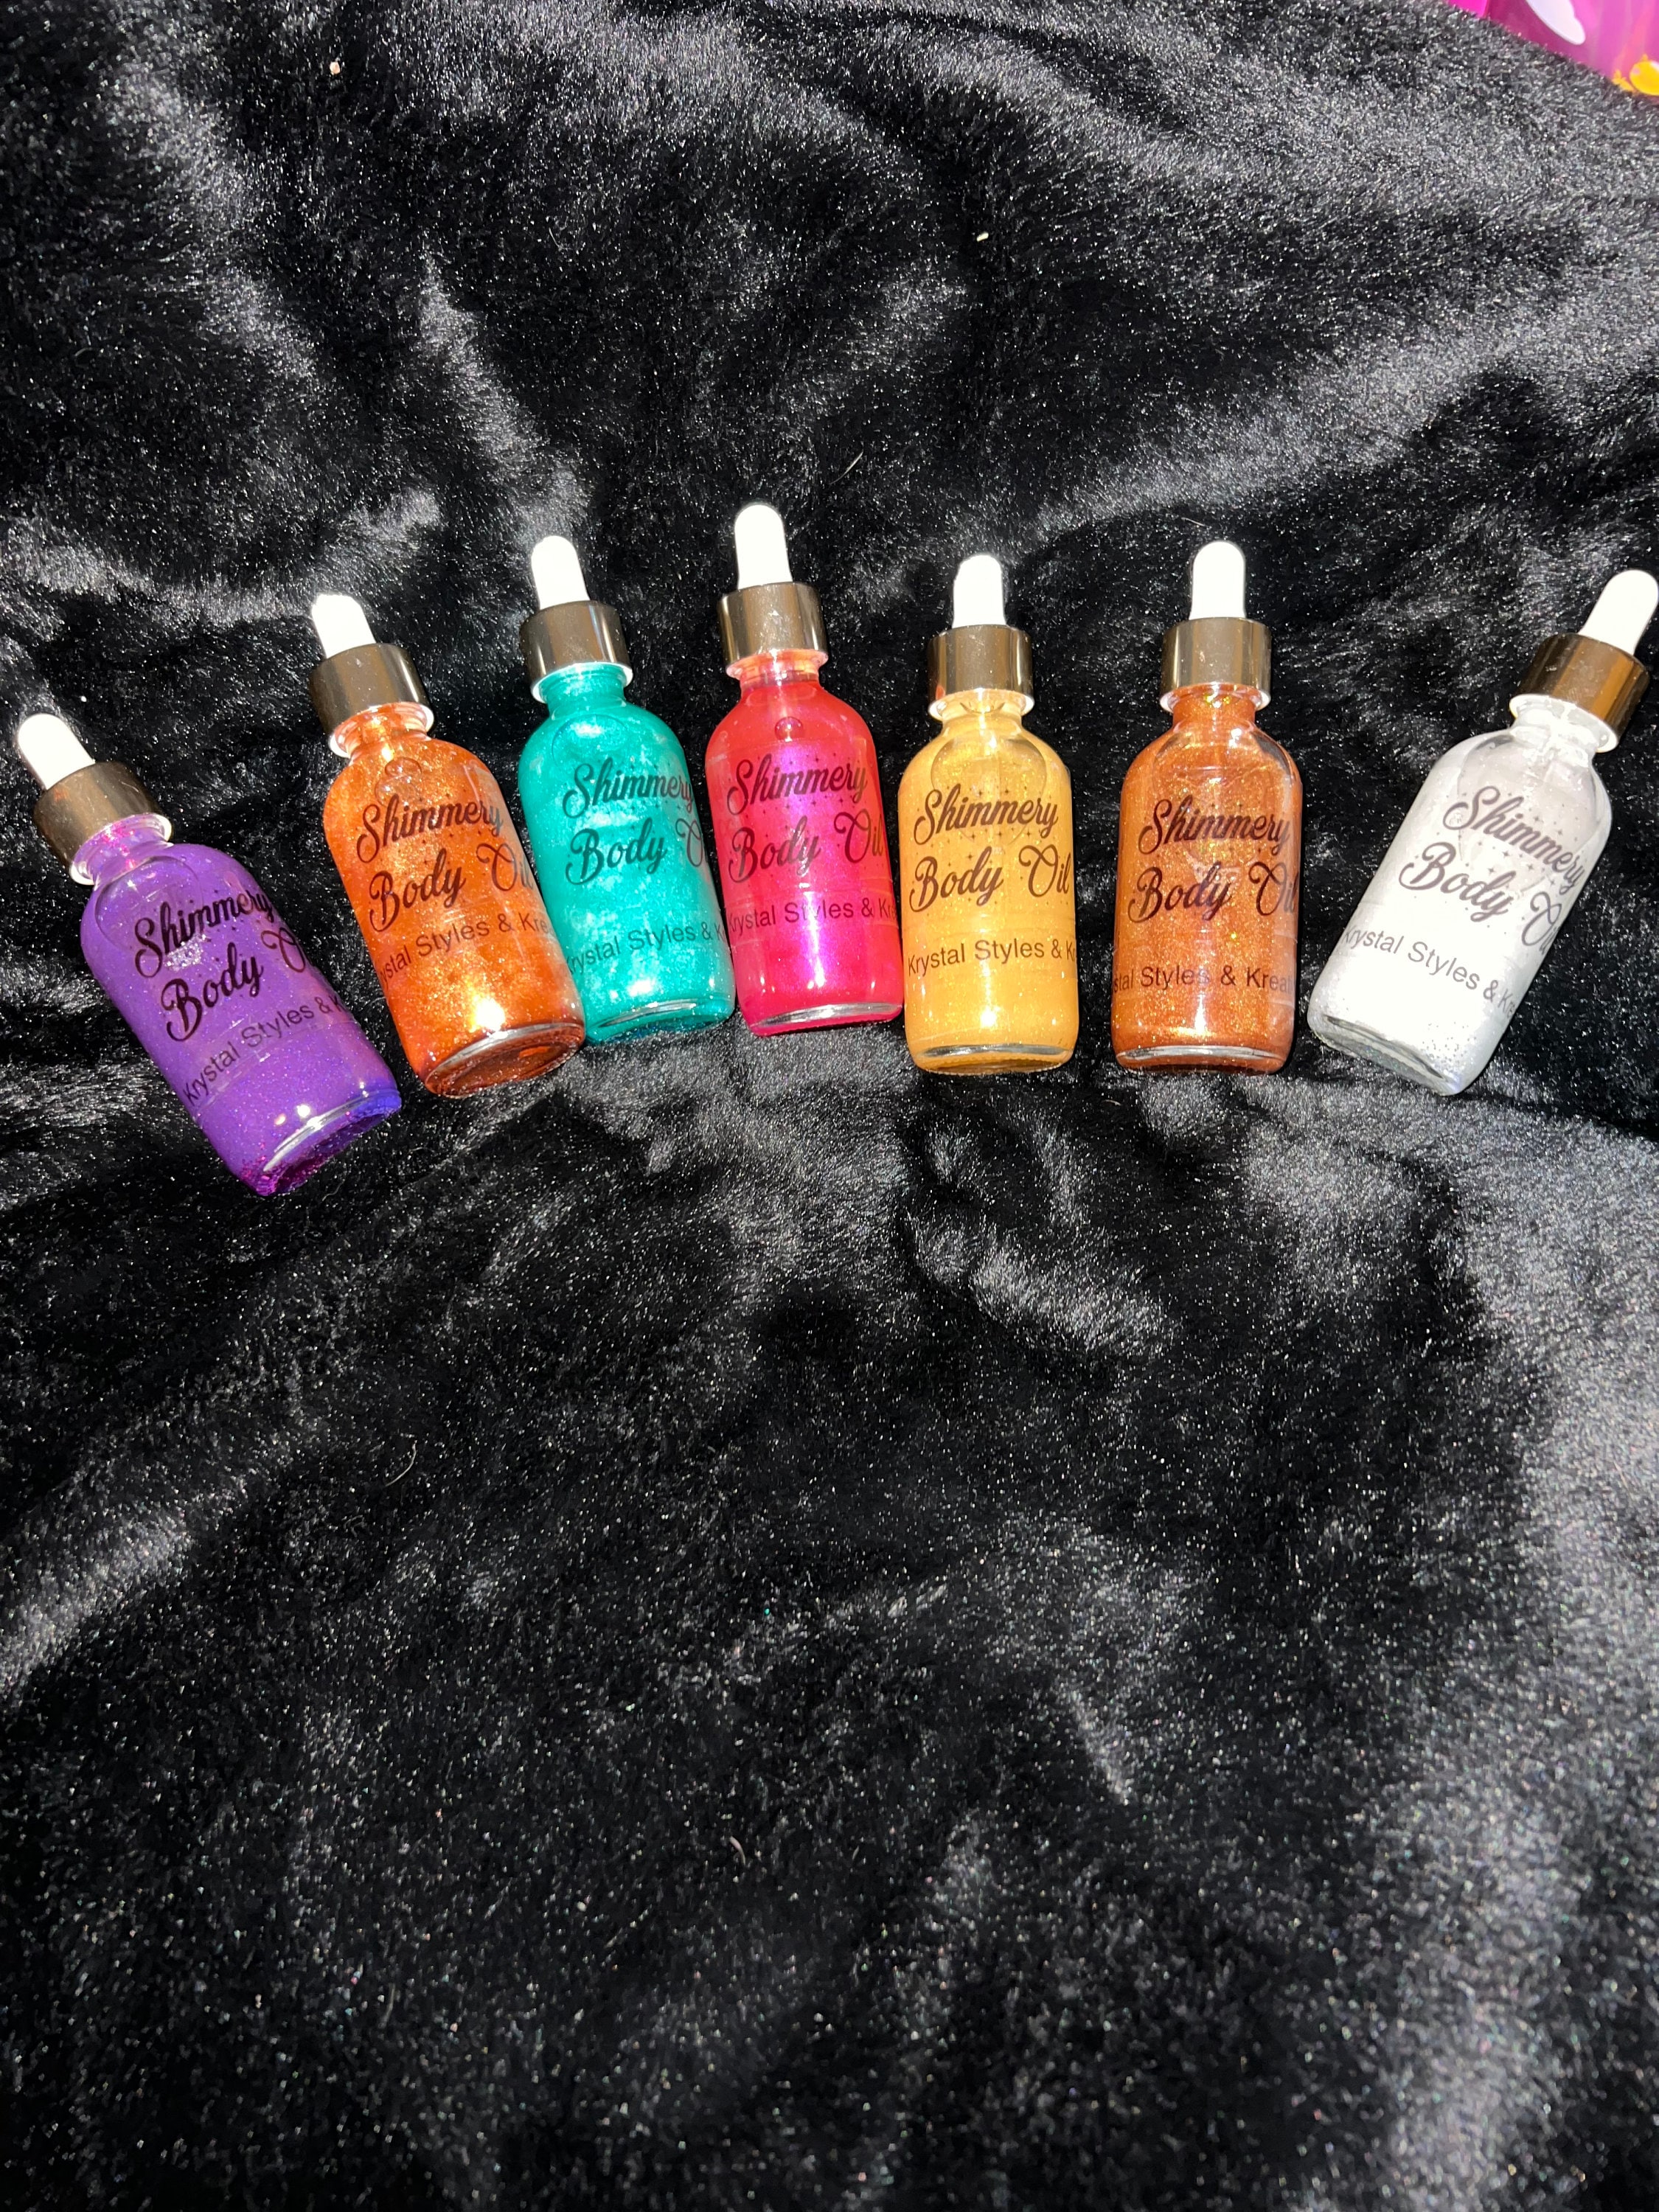 How Many Cocktails Iridescent Biodegradable Glitter Mist Body